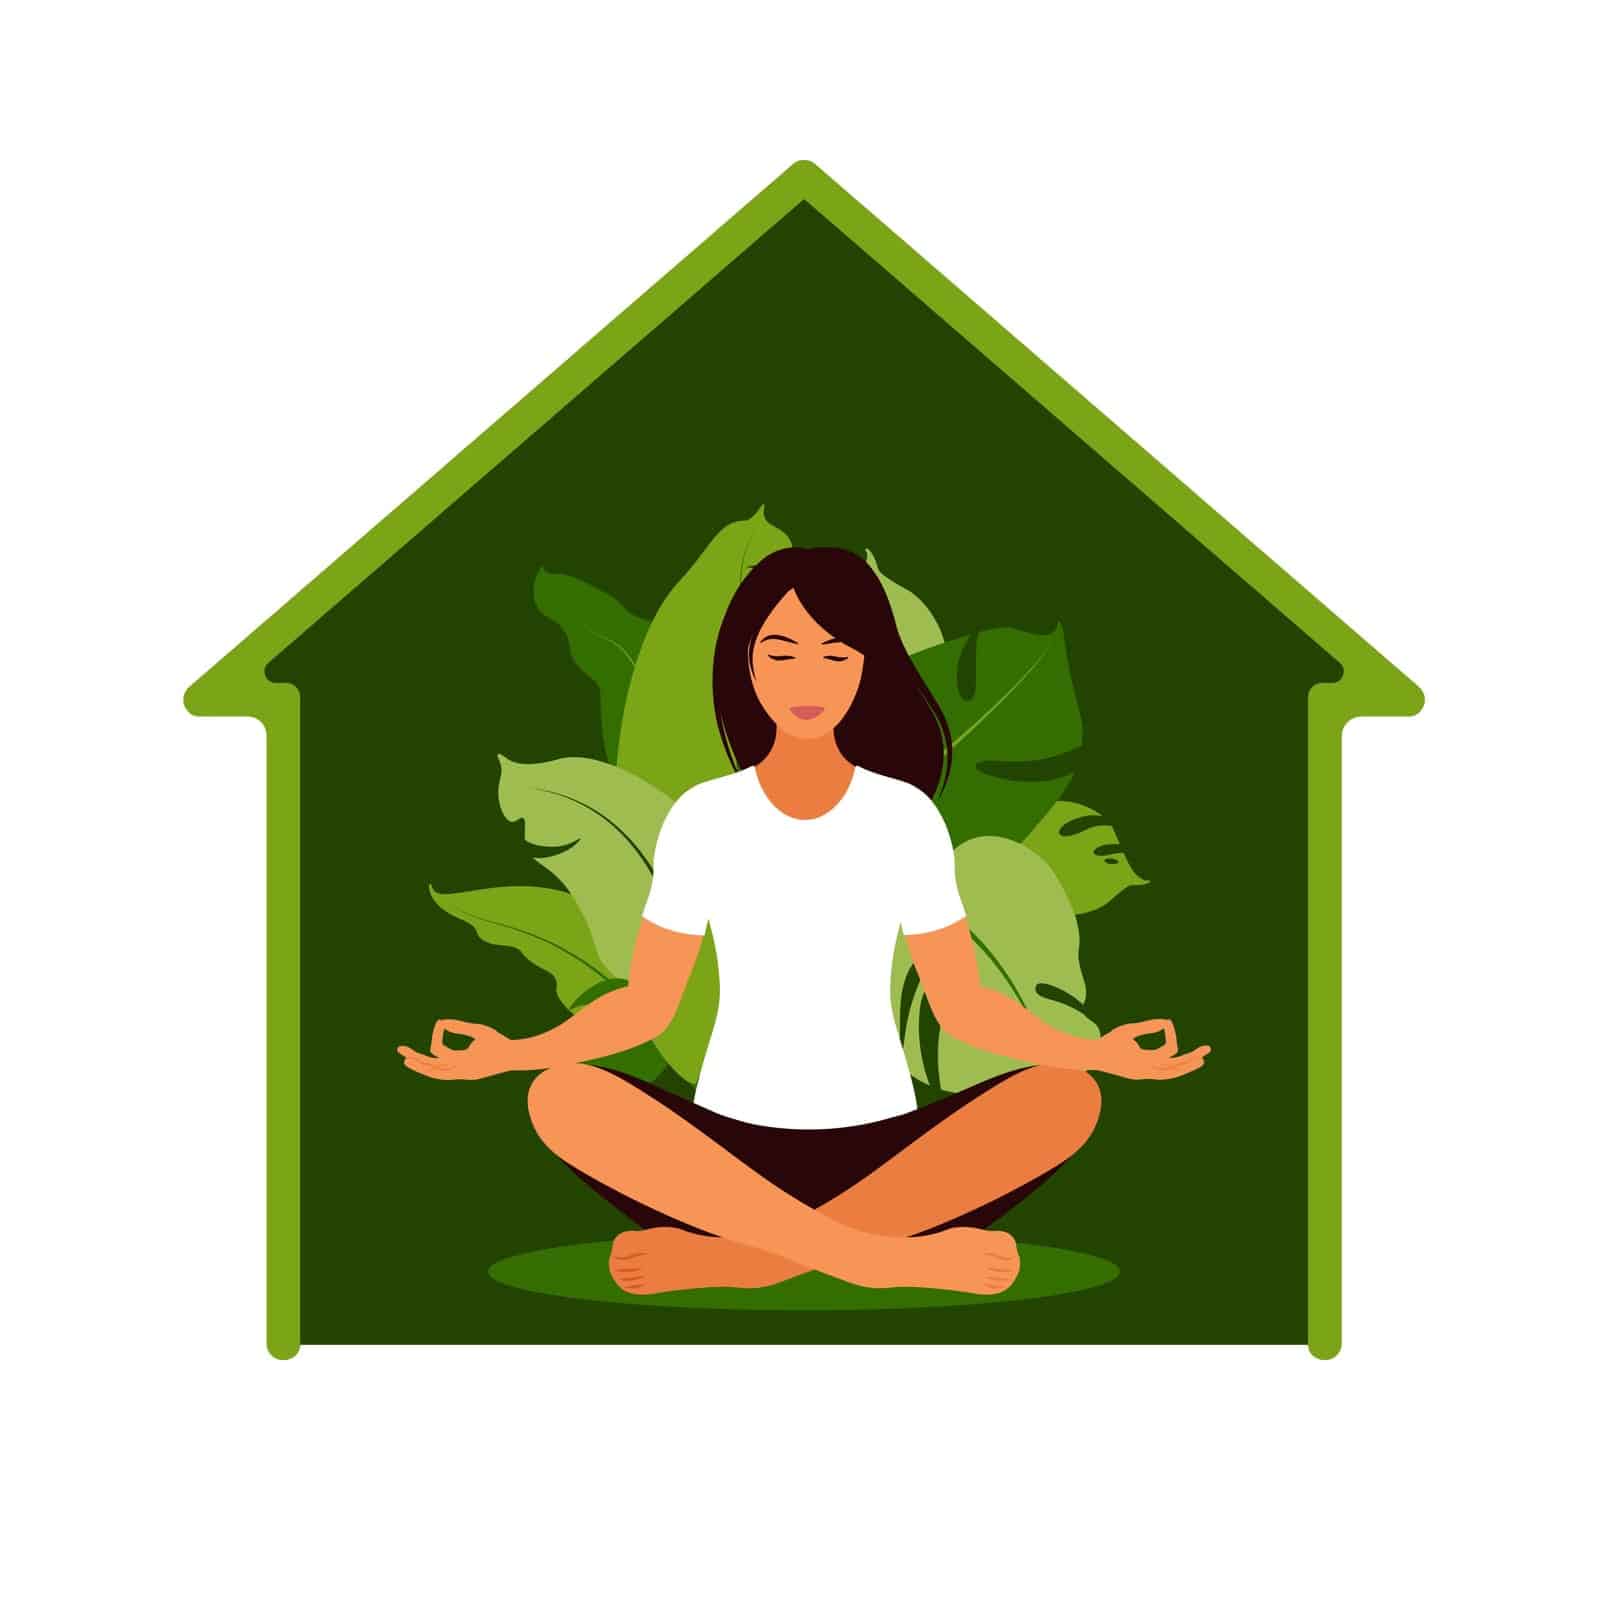 woman-meditating-in-nature-meditation-concept-relax-recreation-healthy-lifestyle-yoga-woman-in-lotus-pose-vector-illustration